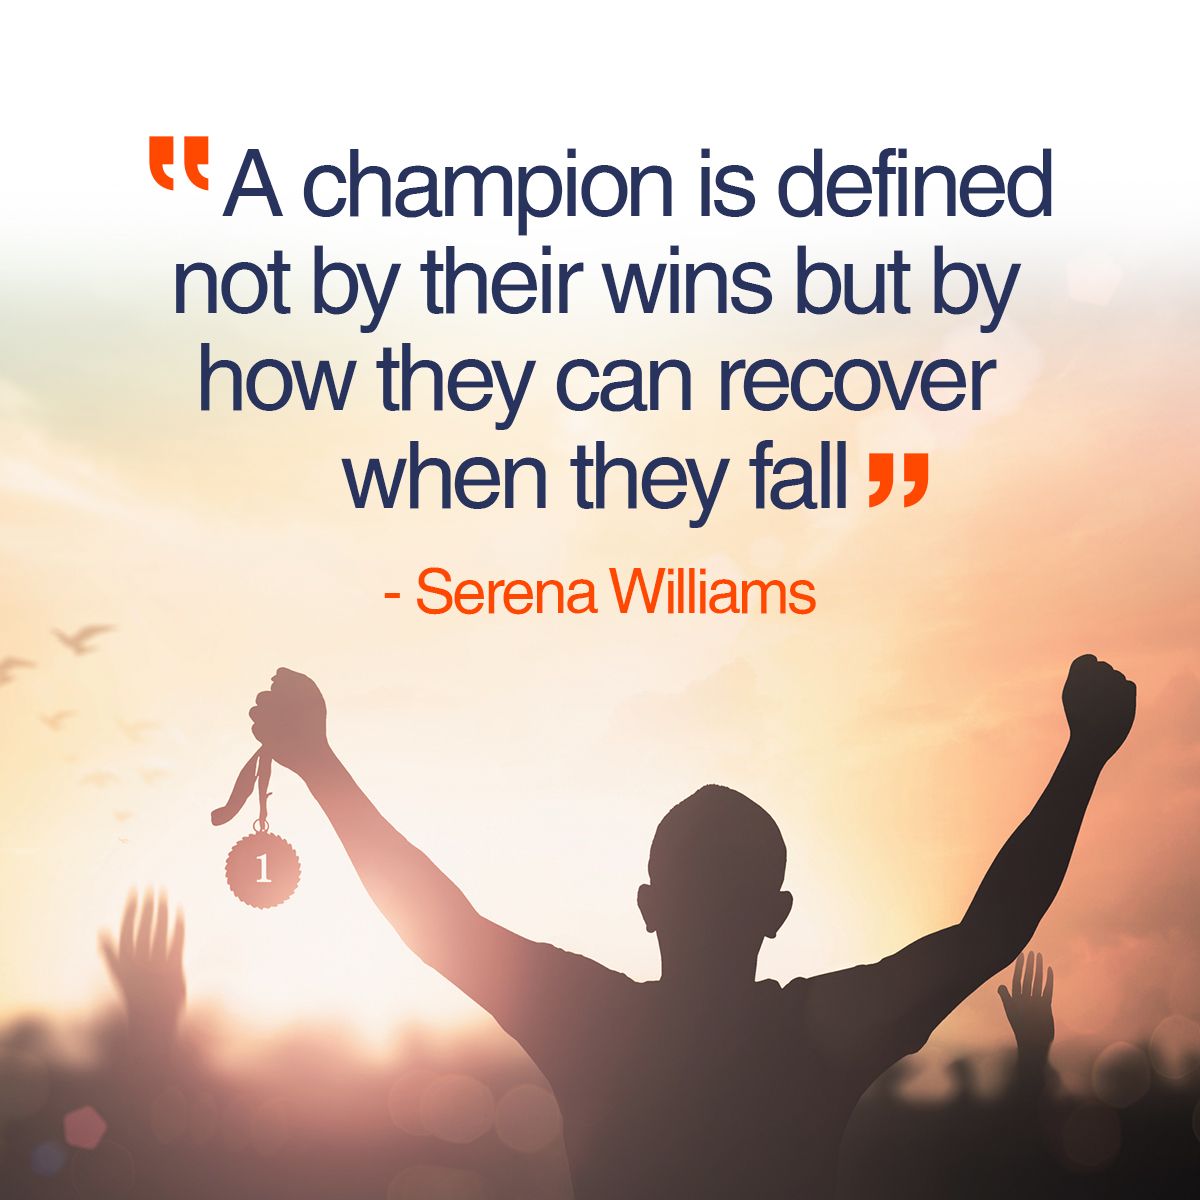 A champion is defined not by their wins but by how they can recover when they fall - Serena Williams